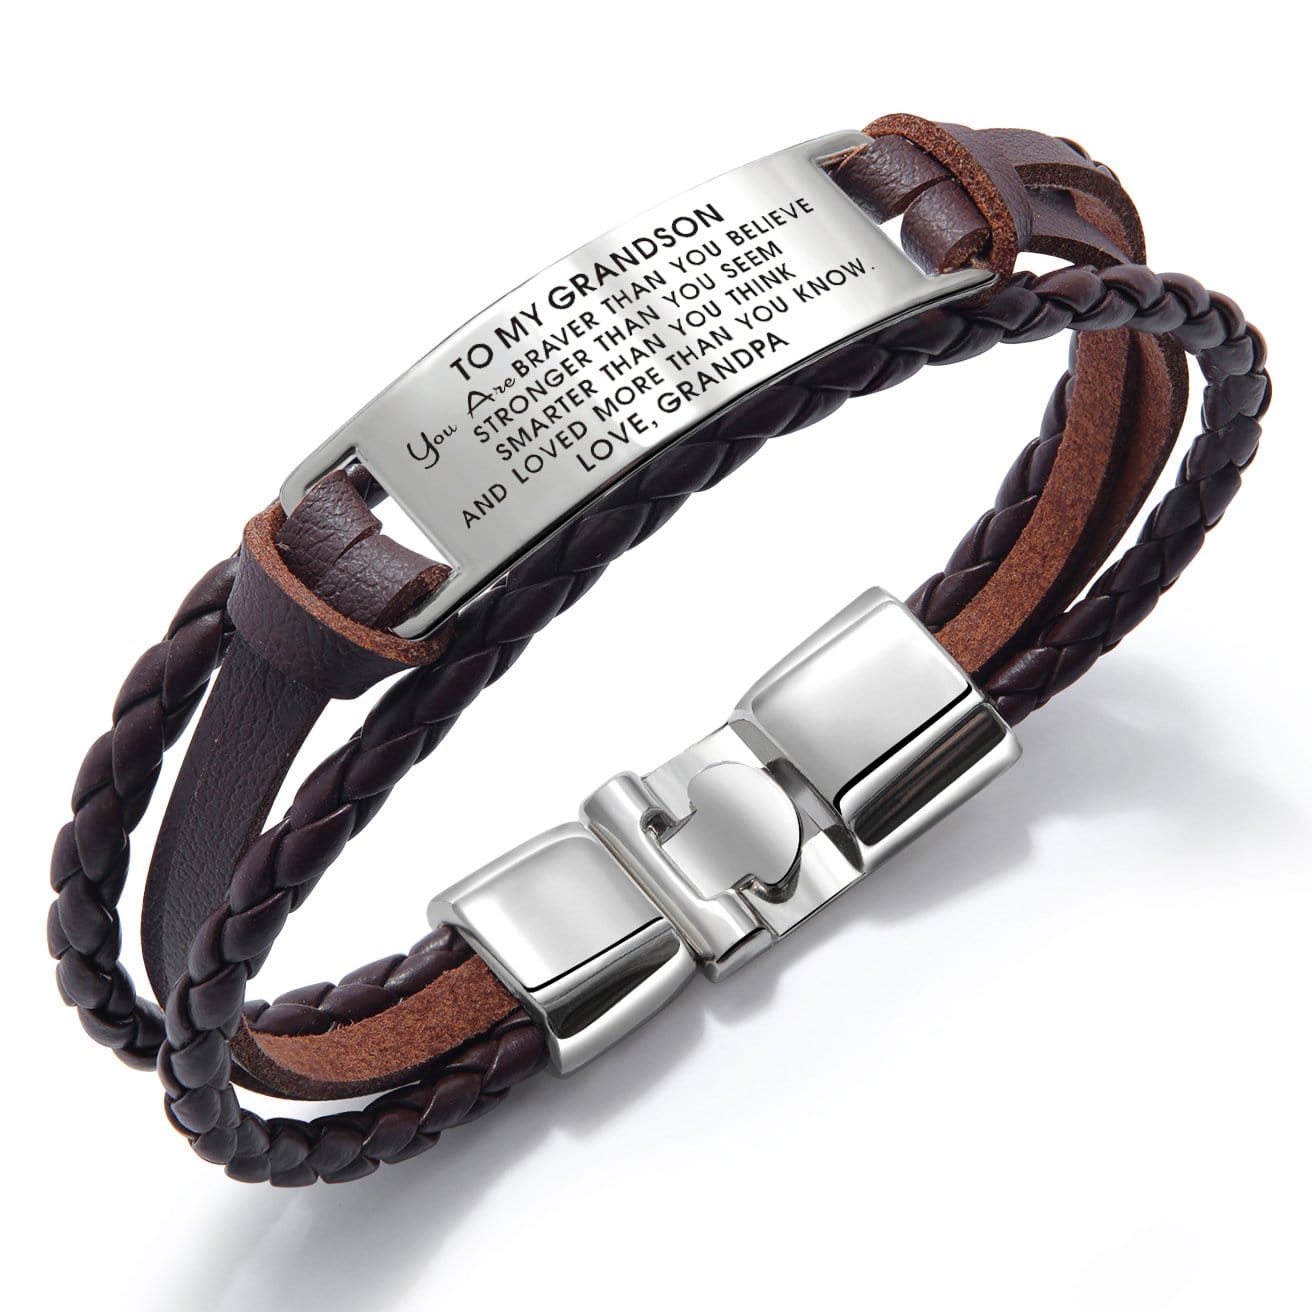 Bracelets Grandpa To Grandson - You Are Loved More Than You Know Leather Bracelet Brown GiveMe-Gifts